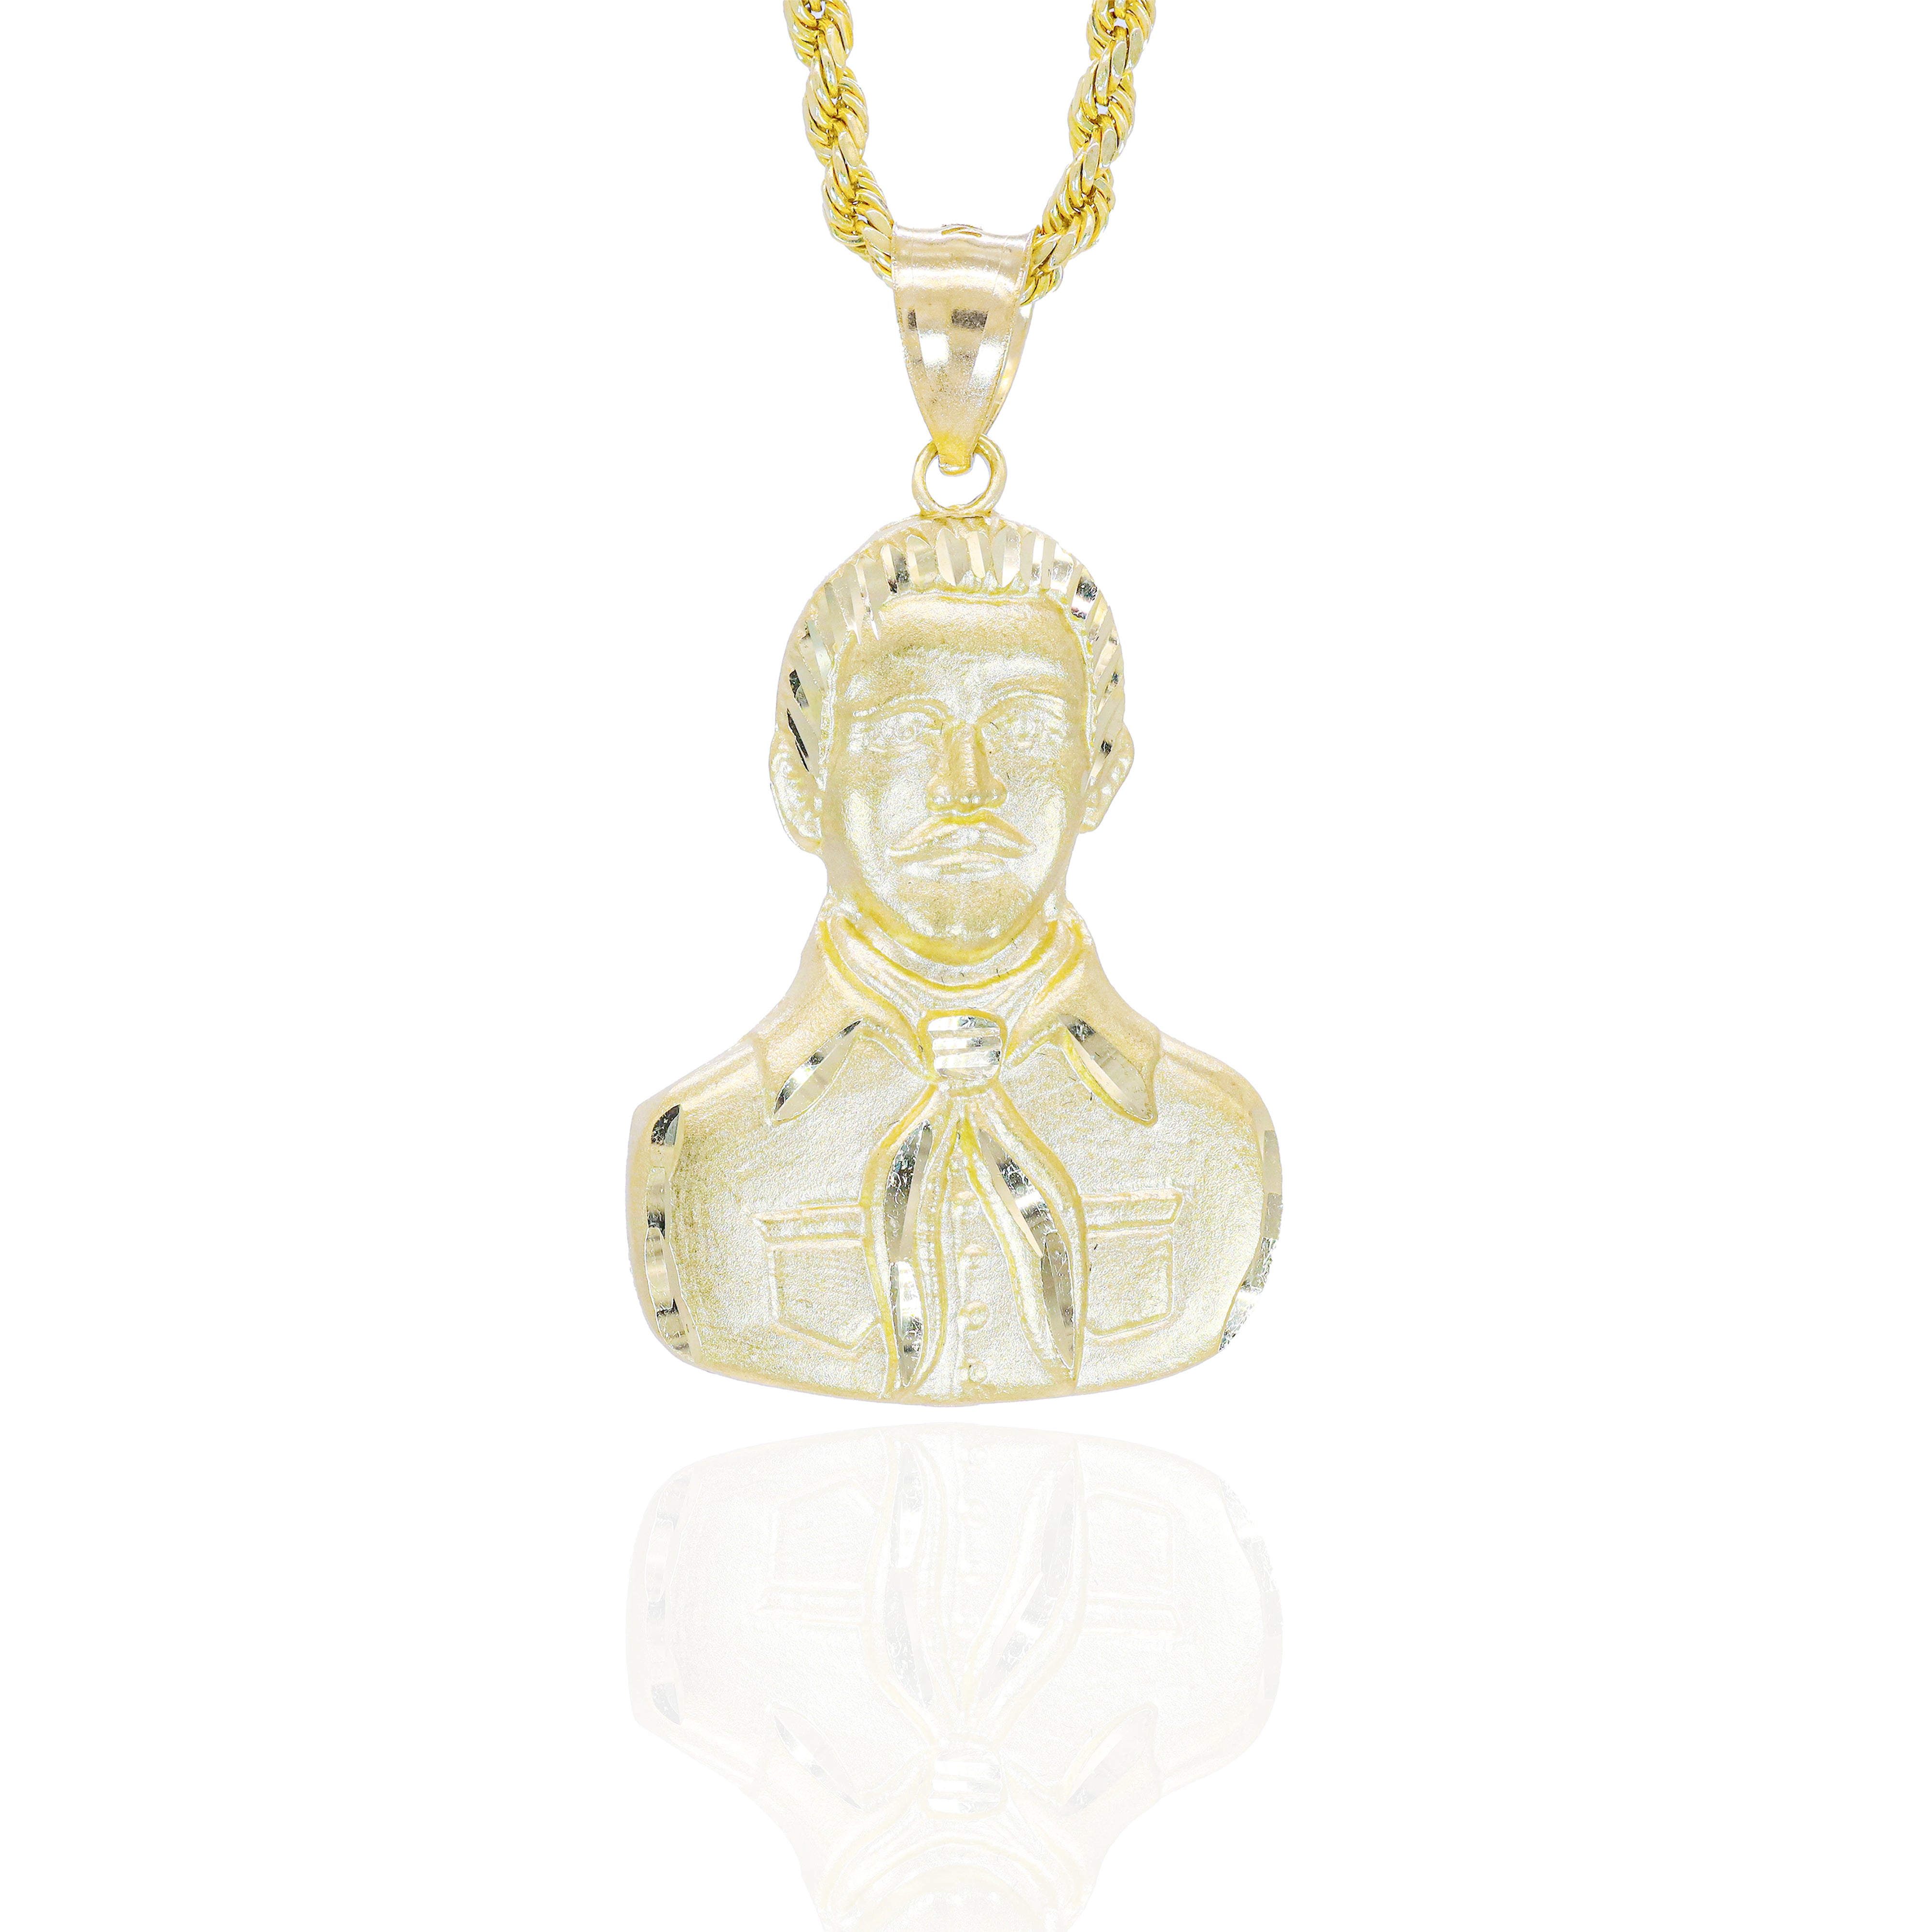 10KT Yellow Gold Malverde Solid Gold Pendant